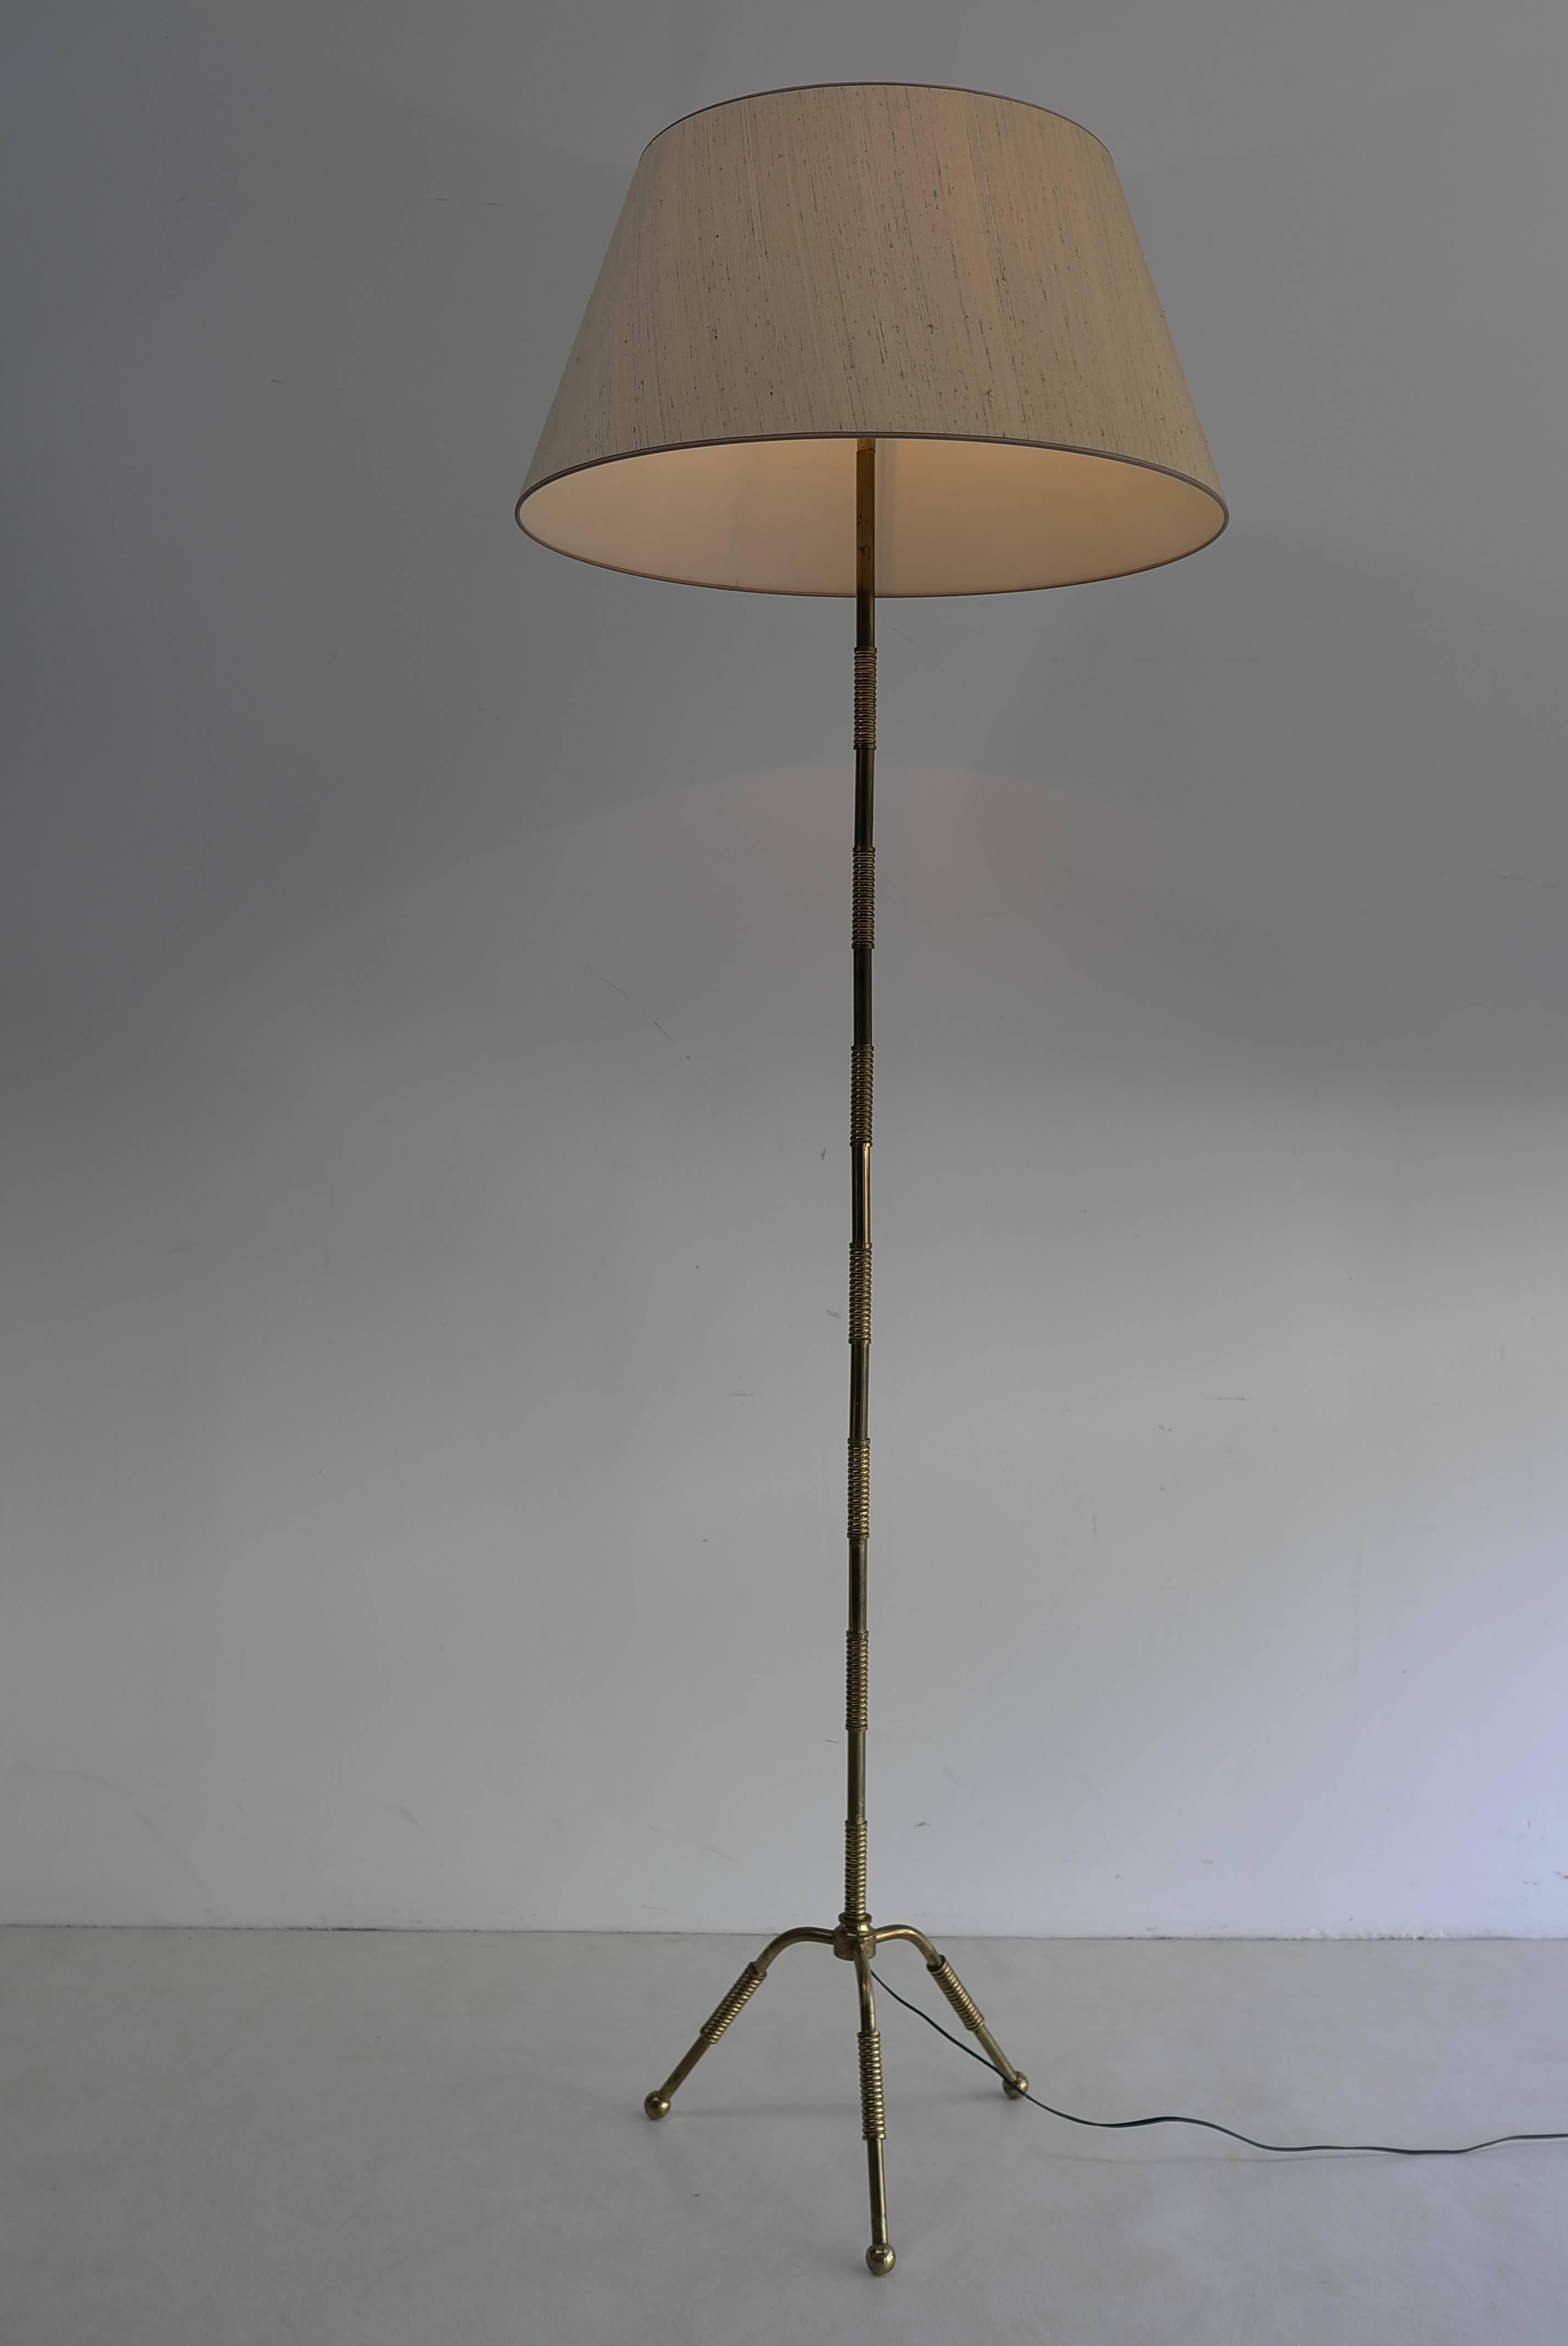 French floor lamp in solid brass by Maison Bagues.
The hood is made from silk.